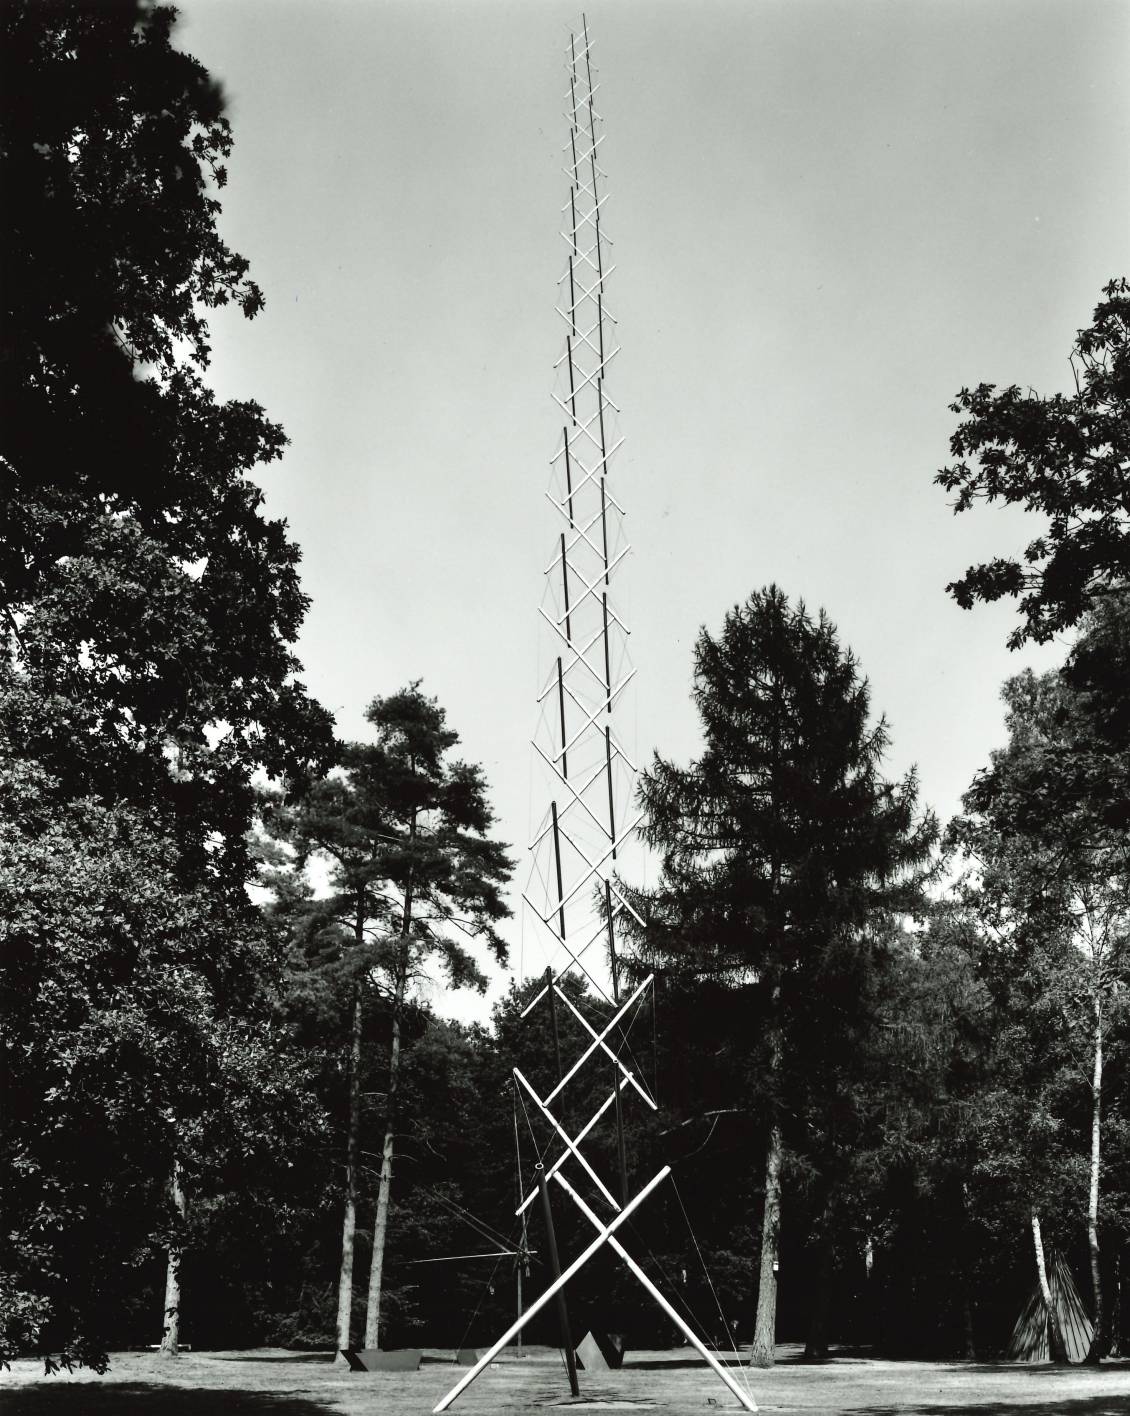 Kenneth Snelson, Needle tower, 1968